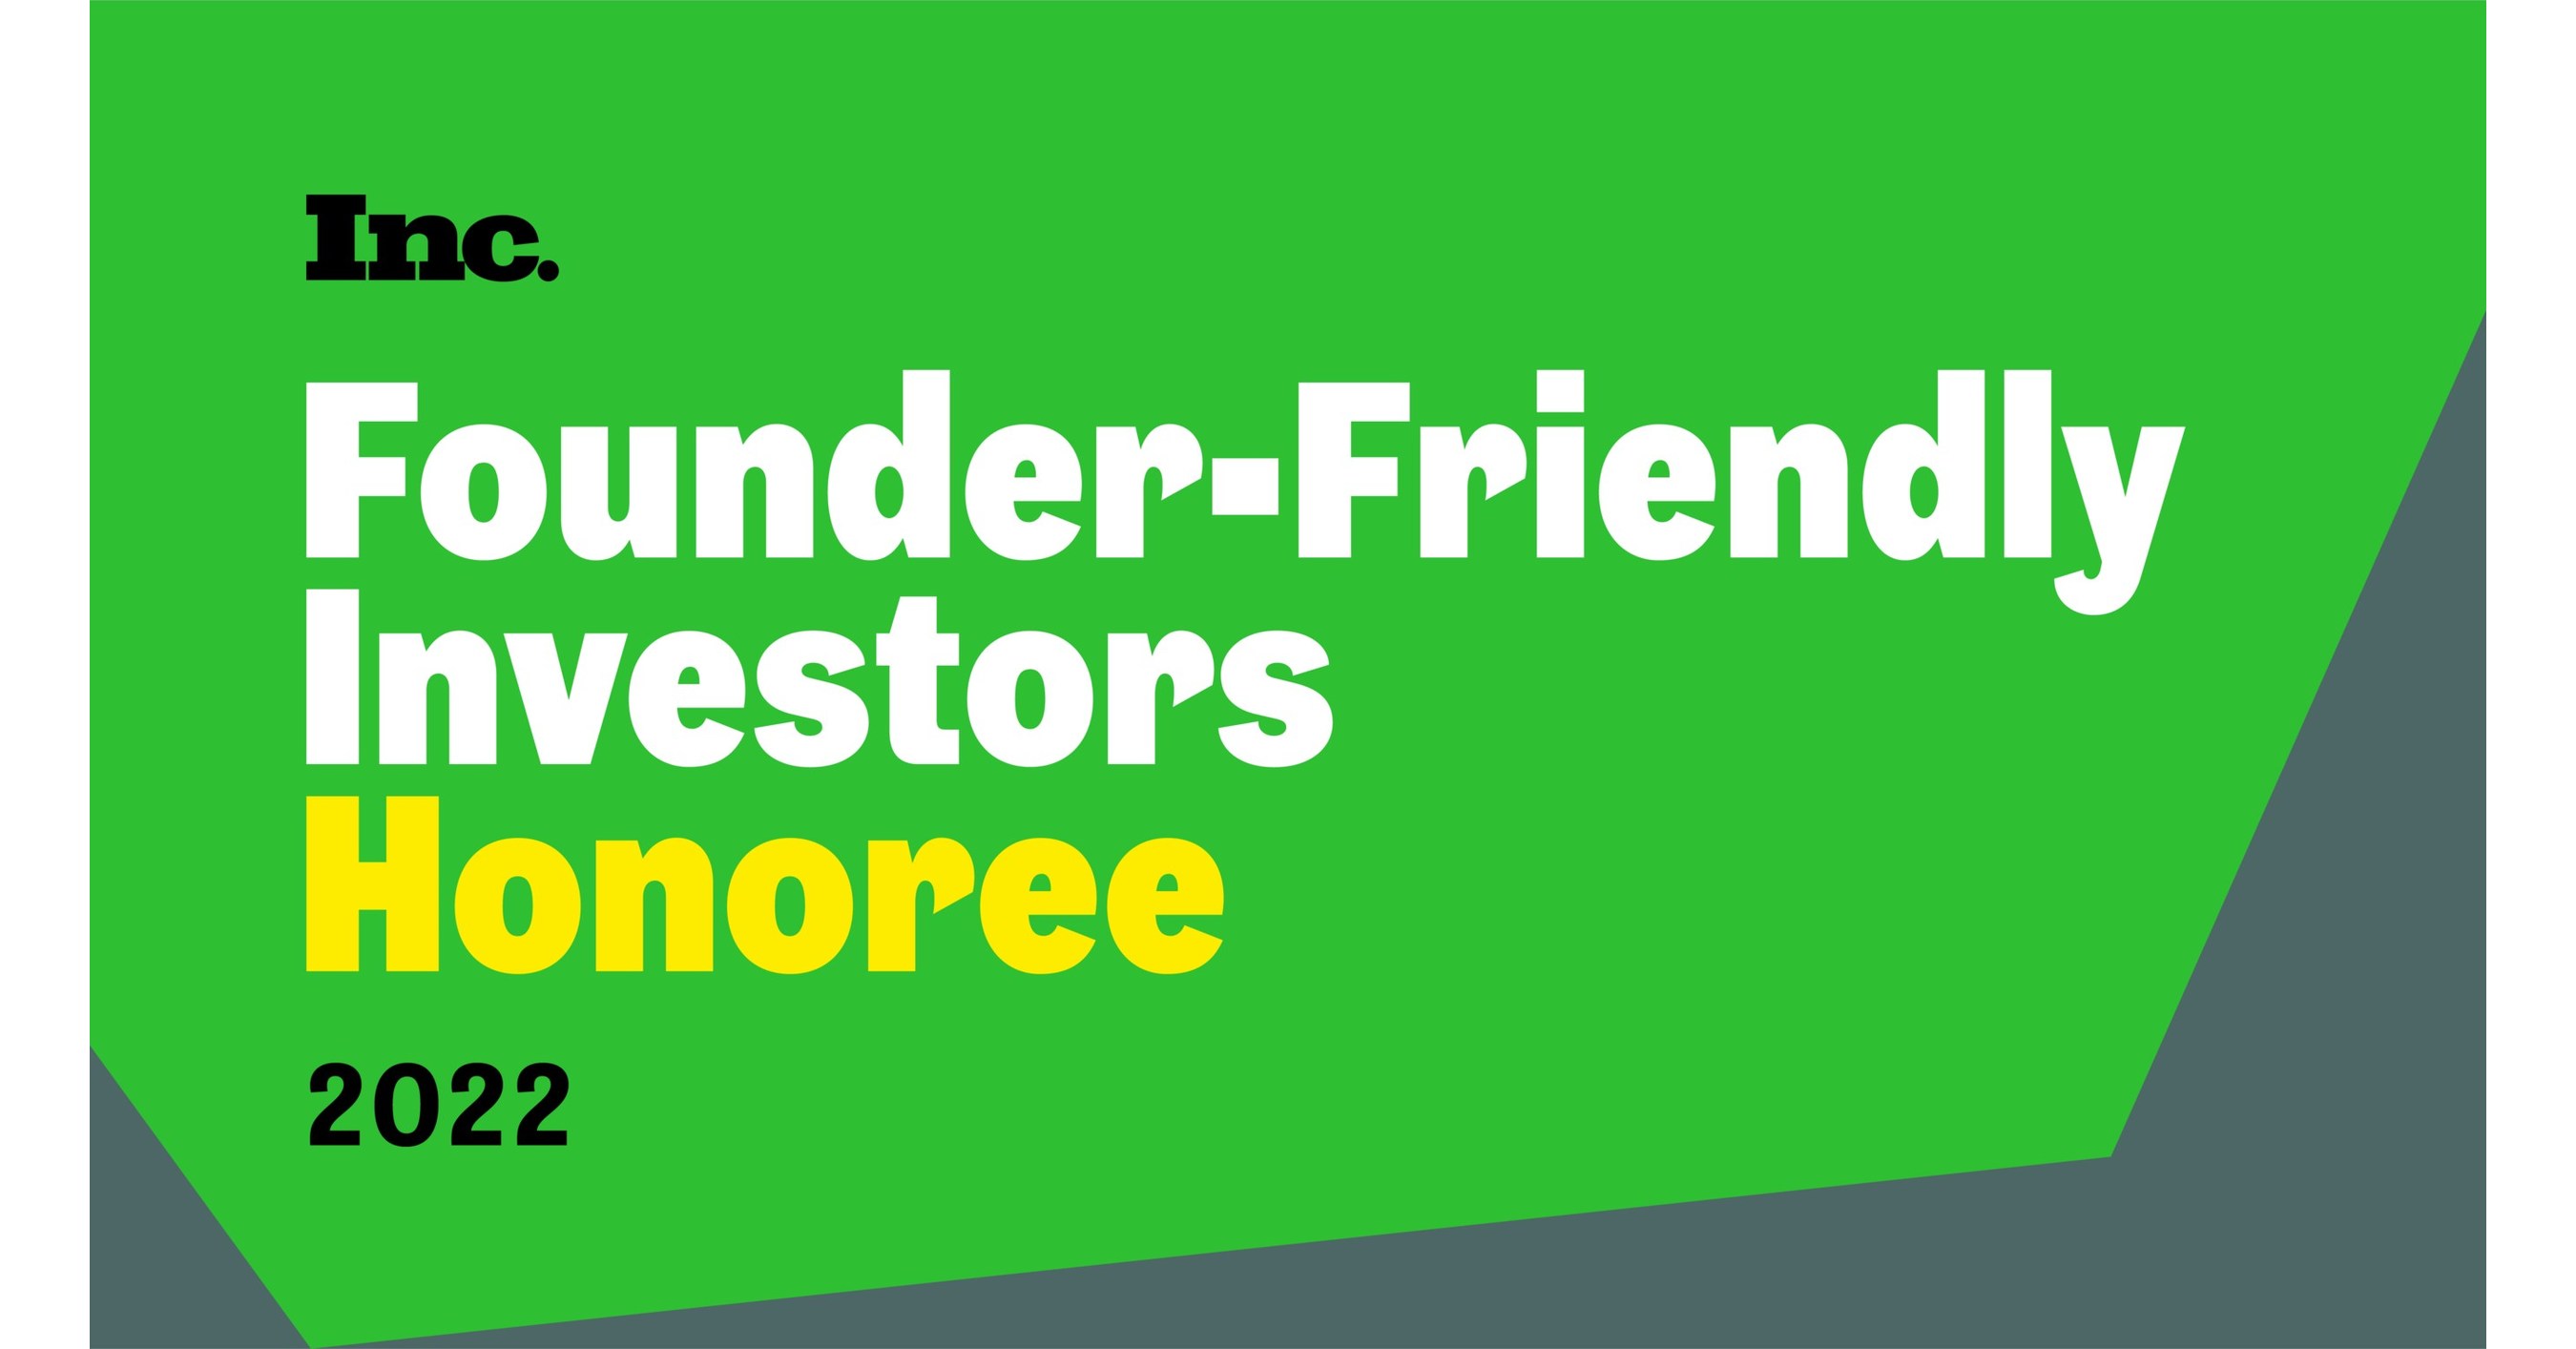 Riverside Partners Named to Inc.'s 2022 List of Founder-Friendly Investors